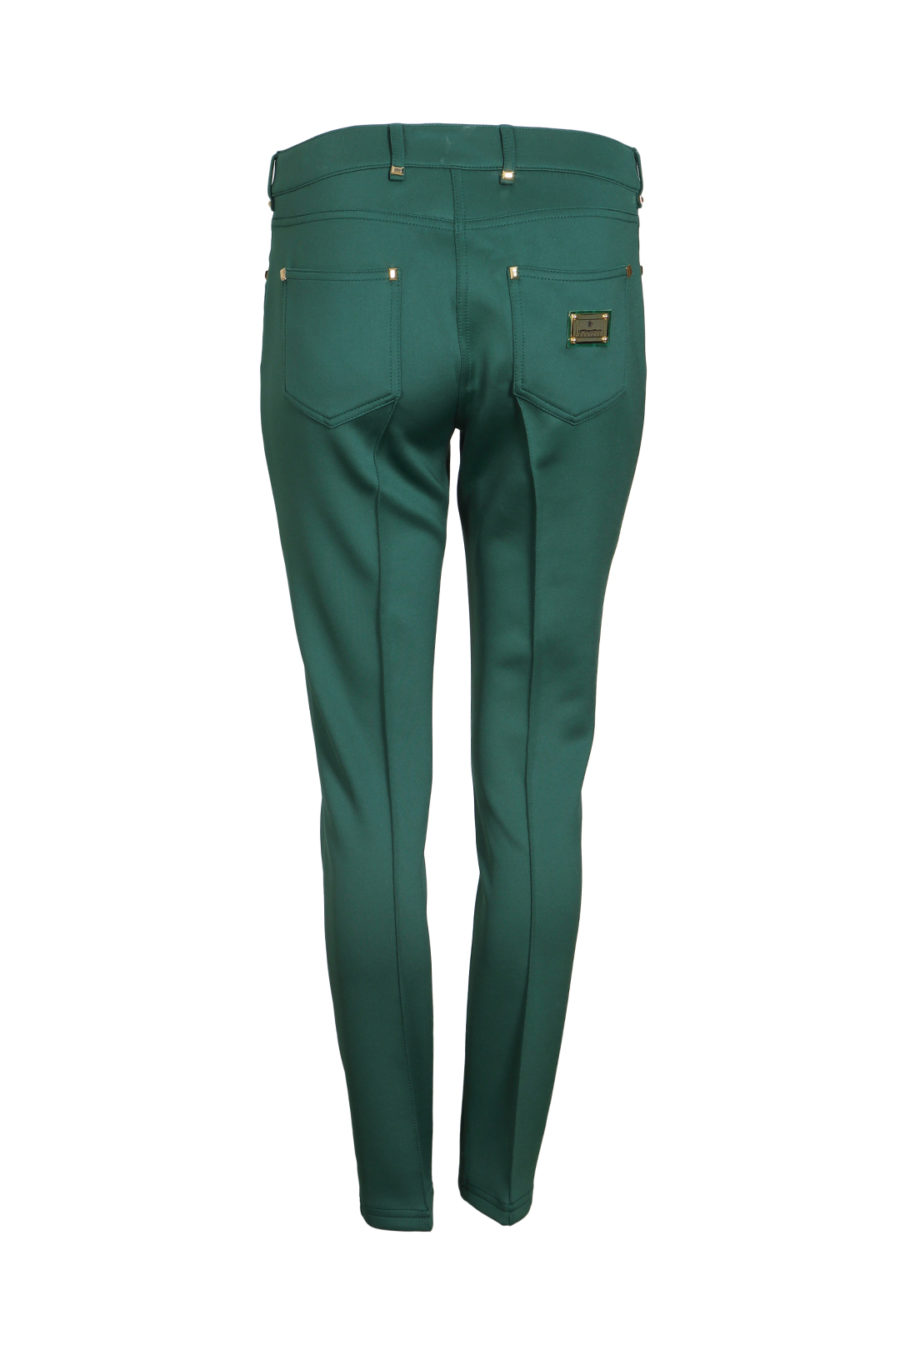 Jersey Jeans, emerald with gold studs